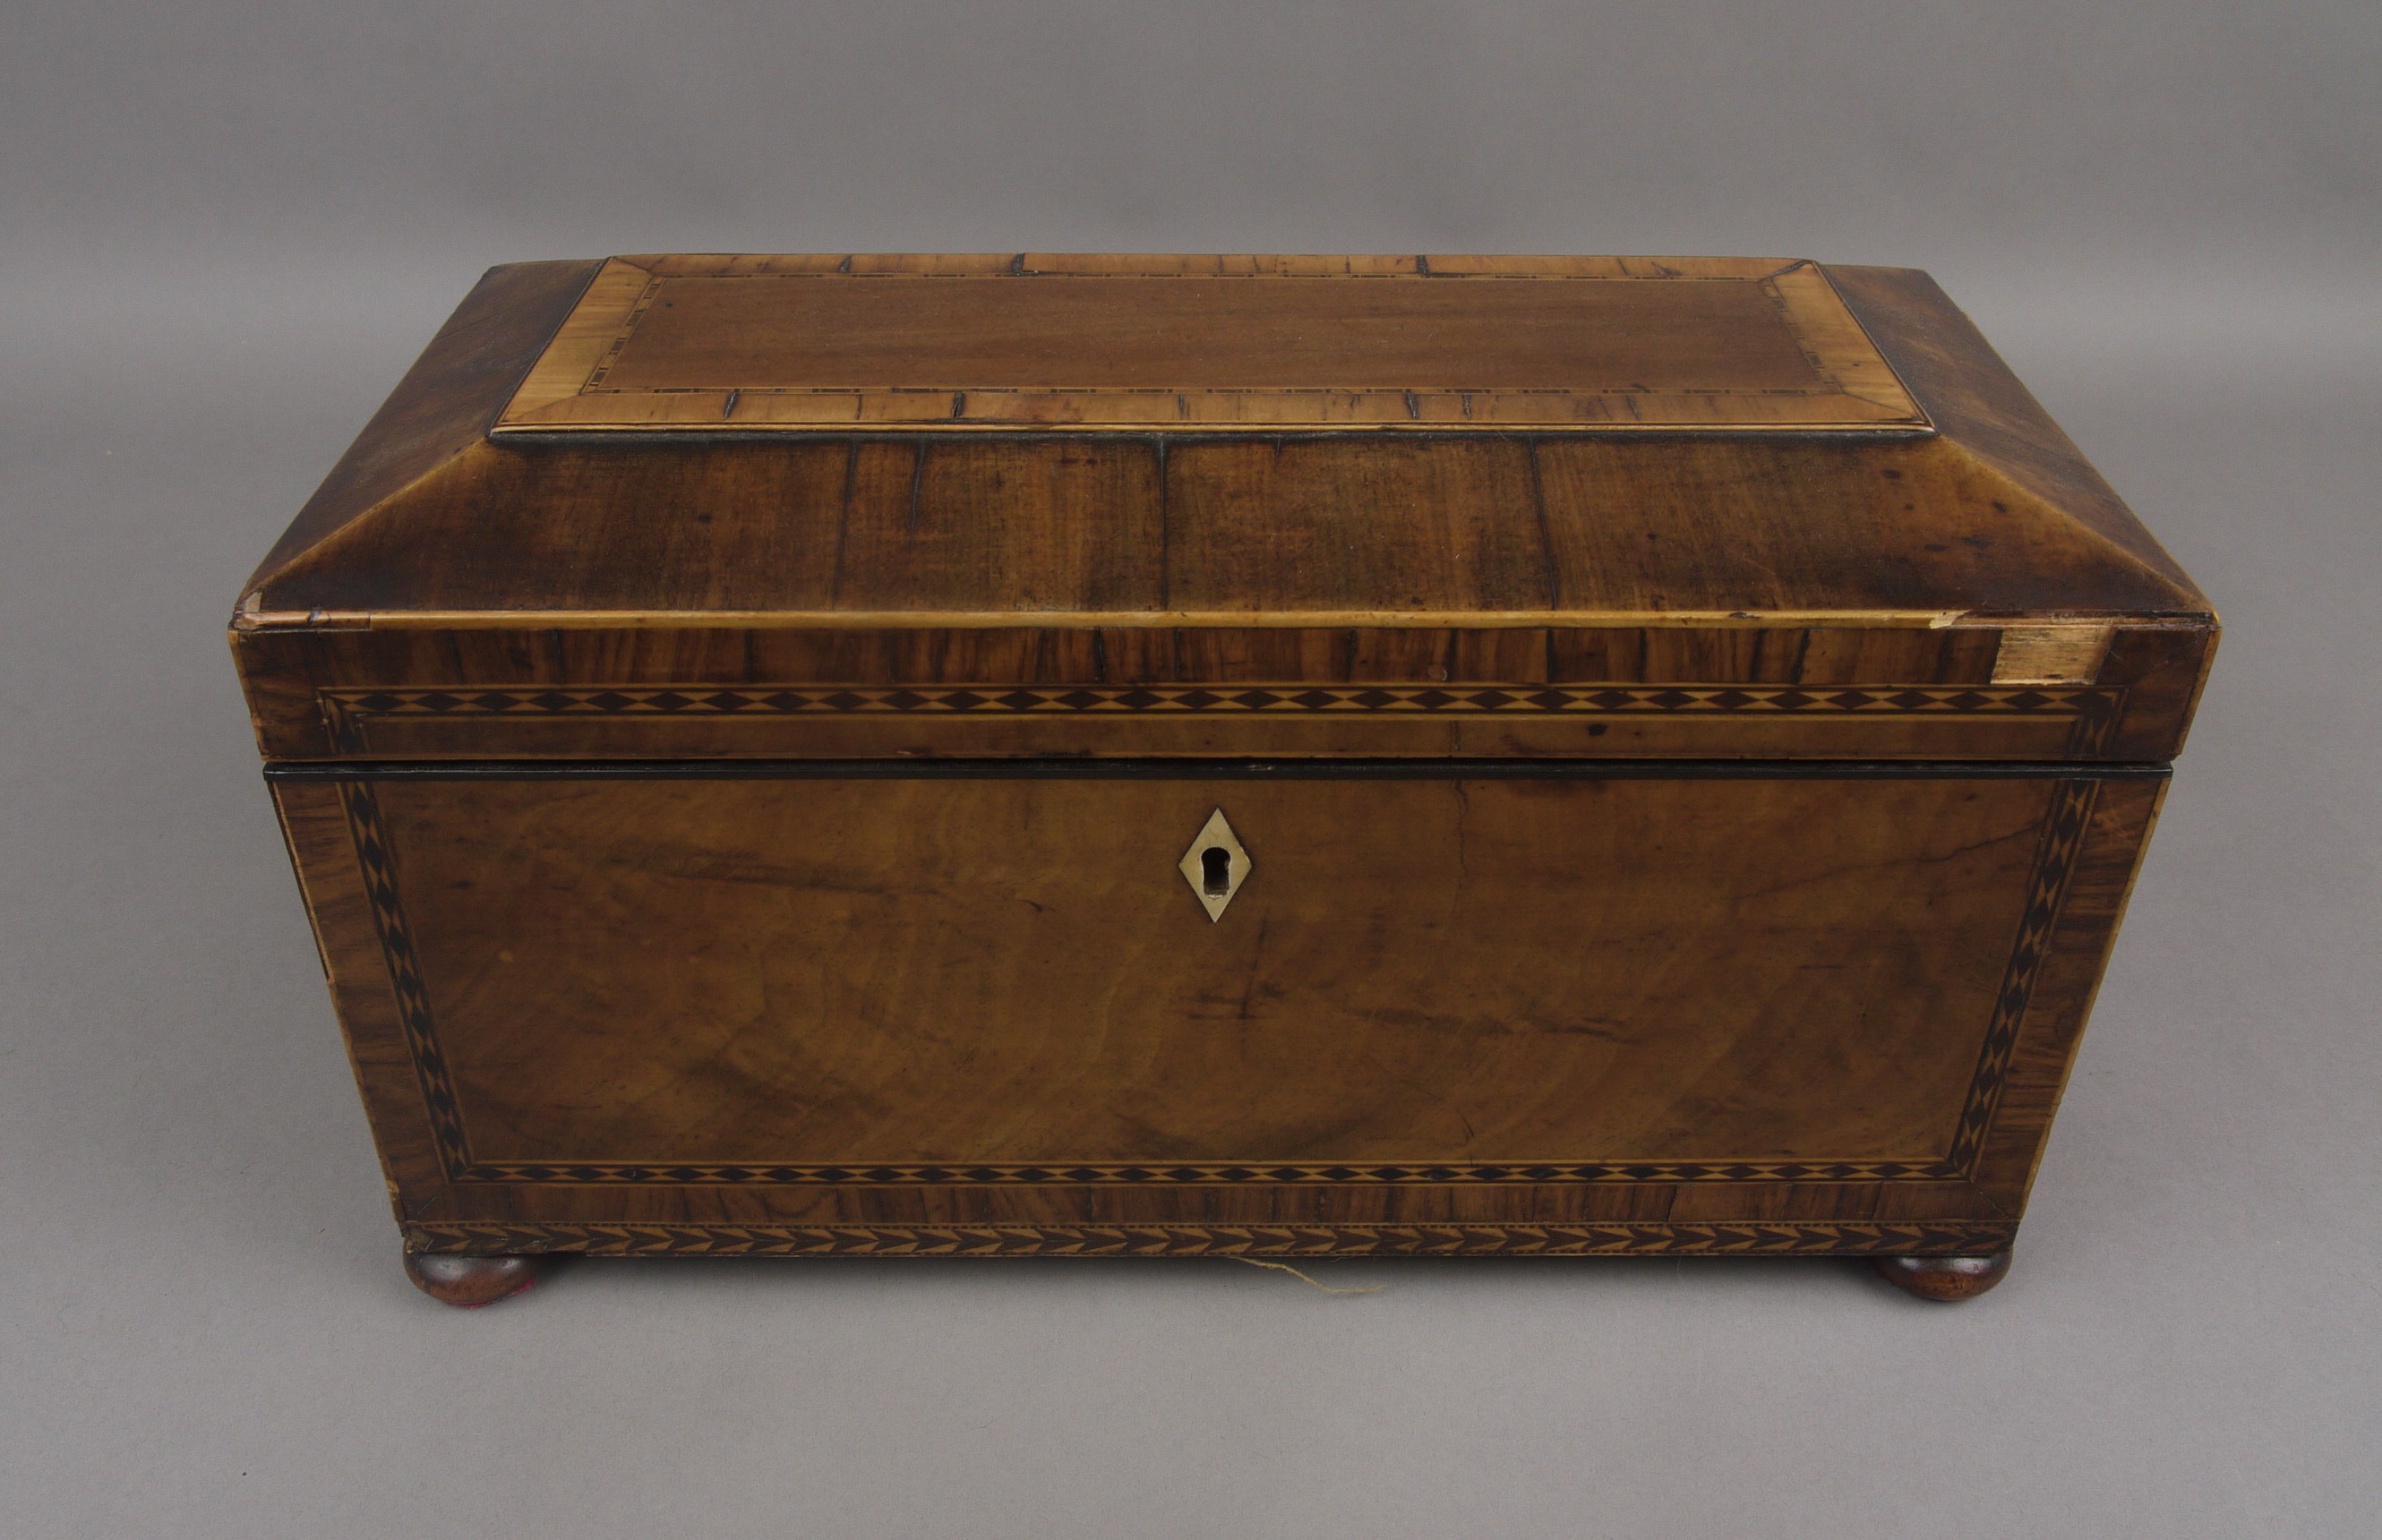 A REGENCY FIGURED MAHOGANY AND ROSEWOOD BANDED SARCOPHAGUS TEA CADDY, with parquetry banding,